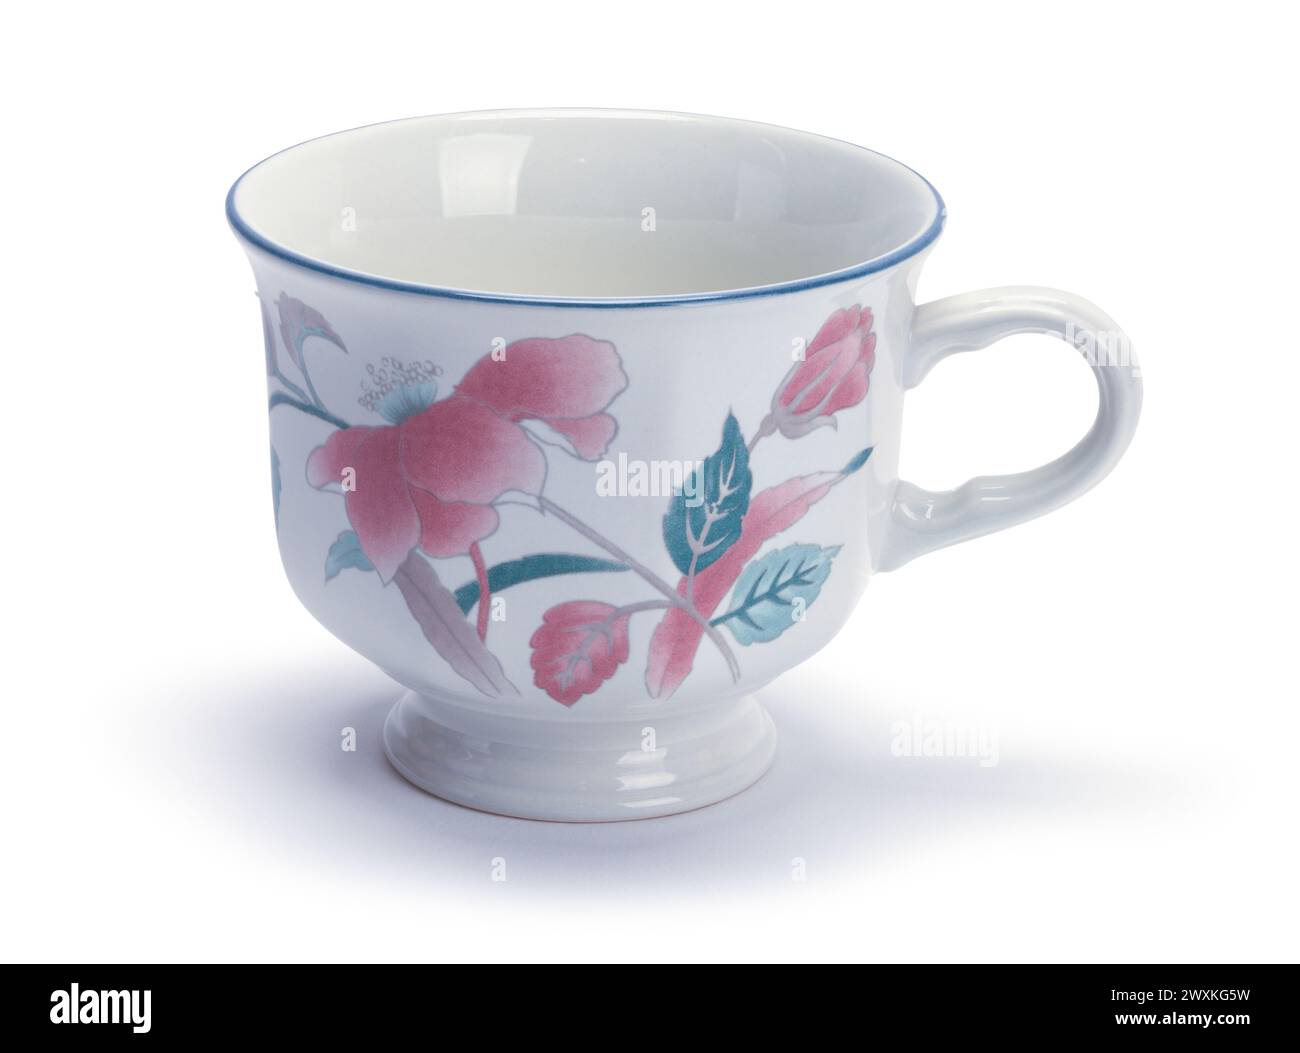 Floral Tea Cup Cut Out on White. Stock Photo